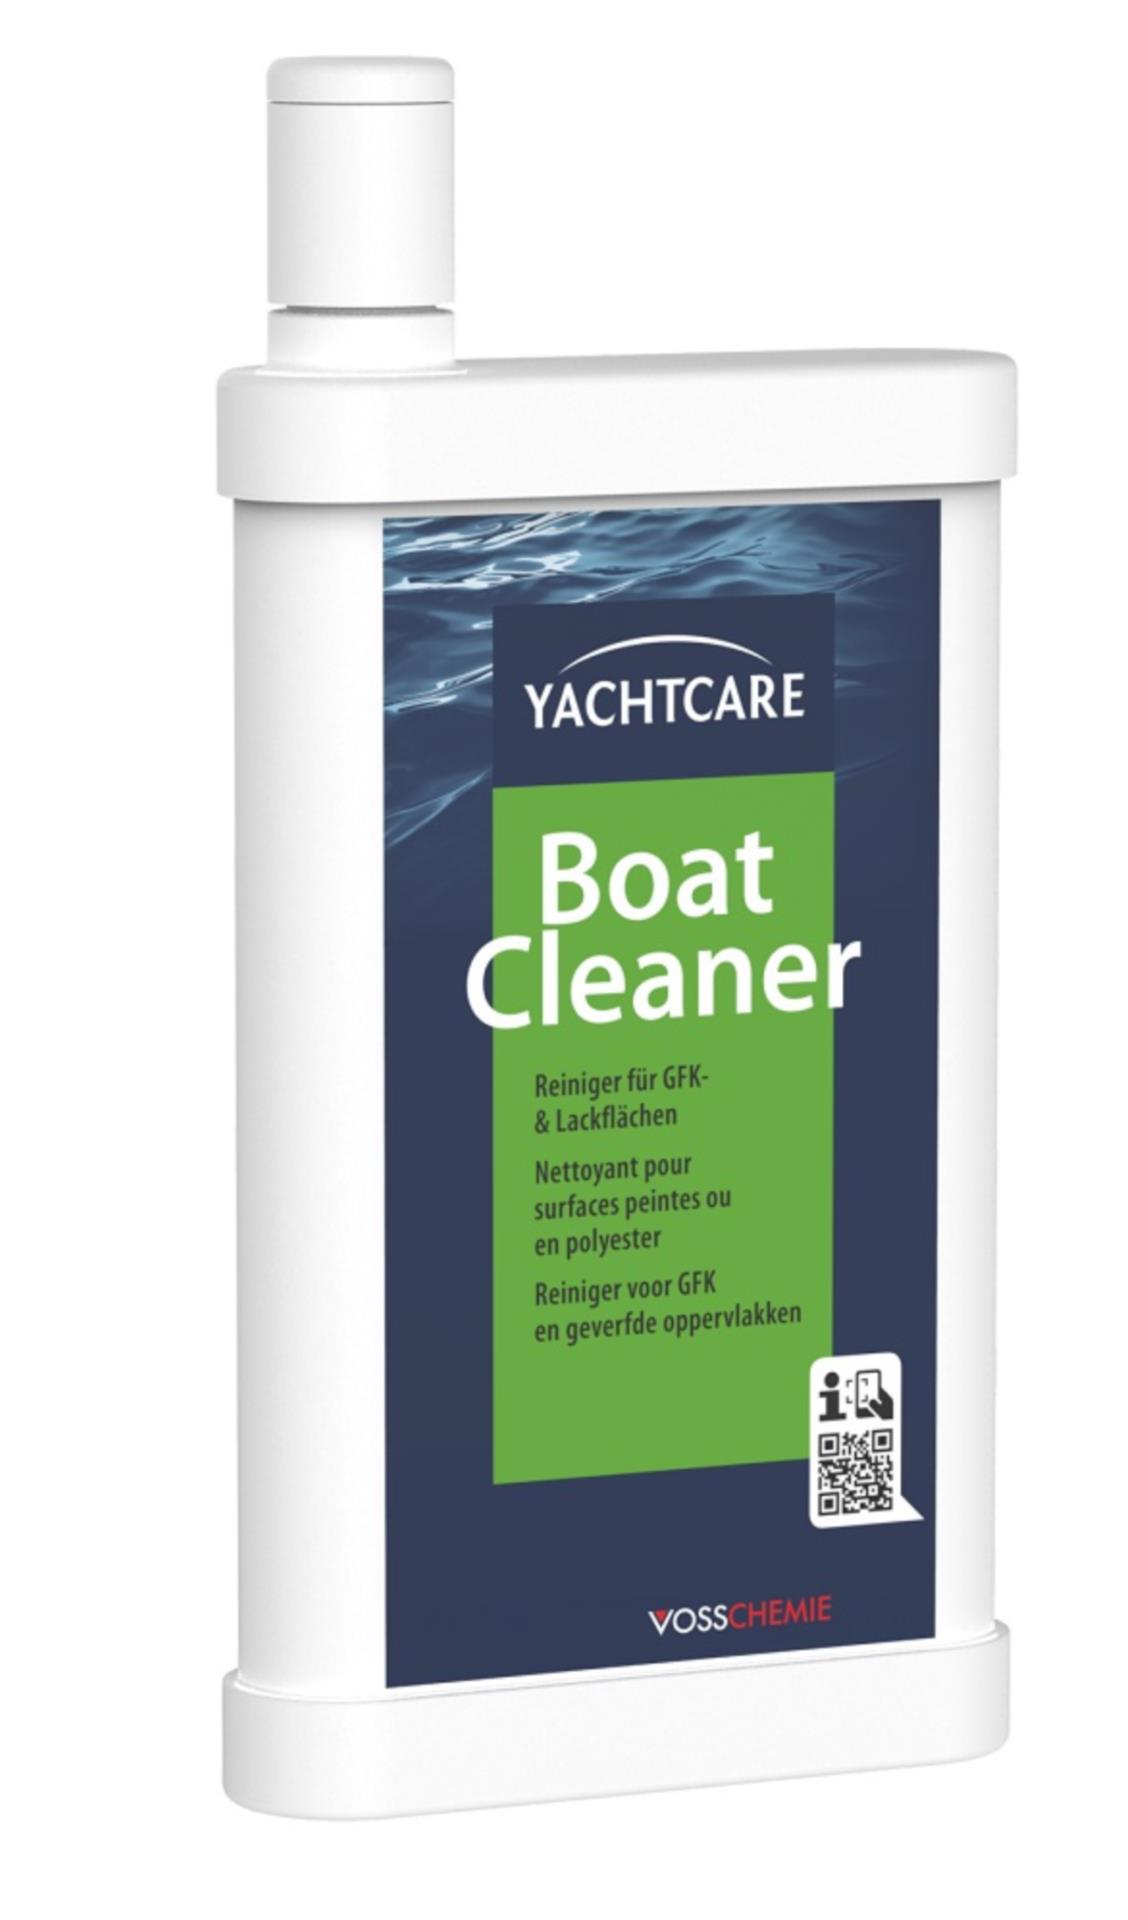 yachtcare boat cleaner